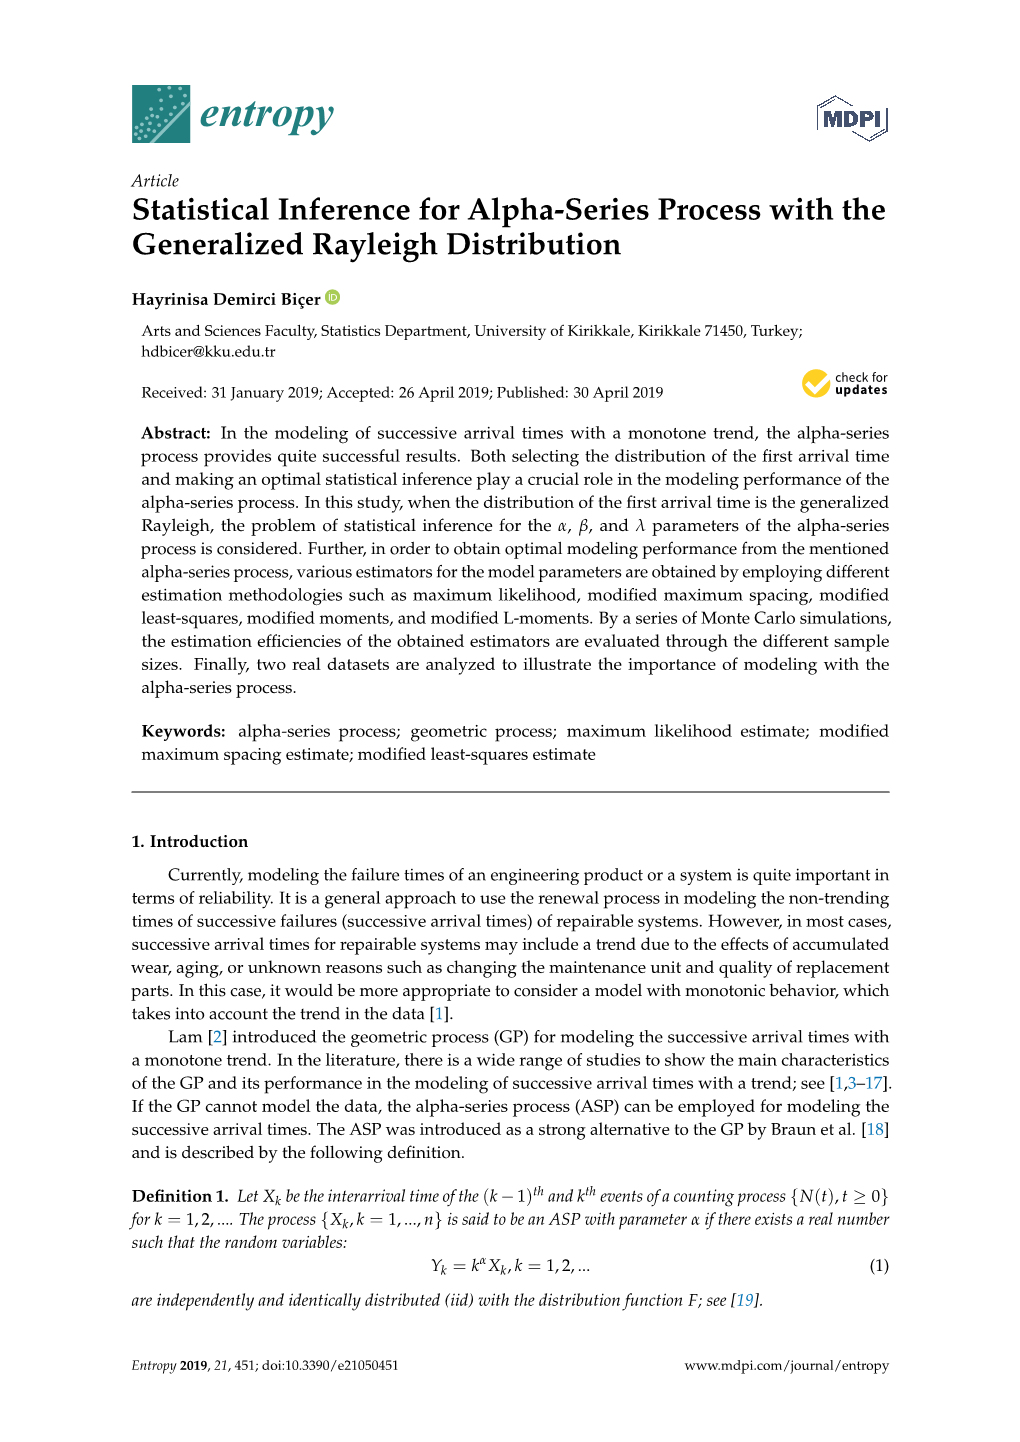 Statistical Inference for Alpha-Series Process with the Generalized Rayleigh Distribution